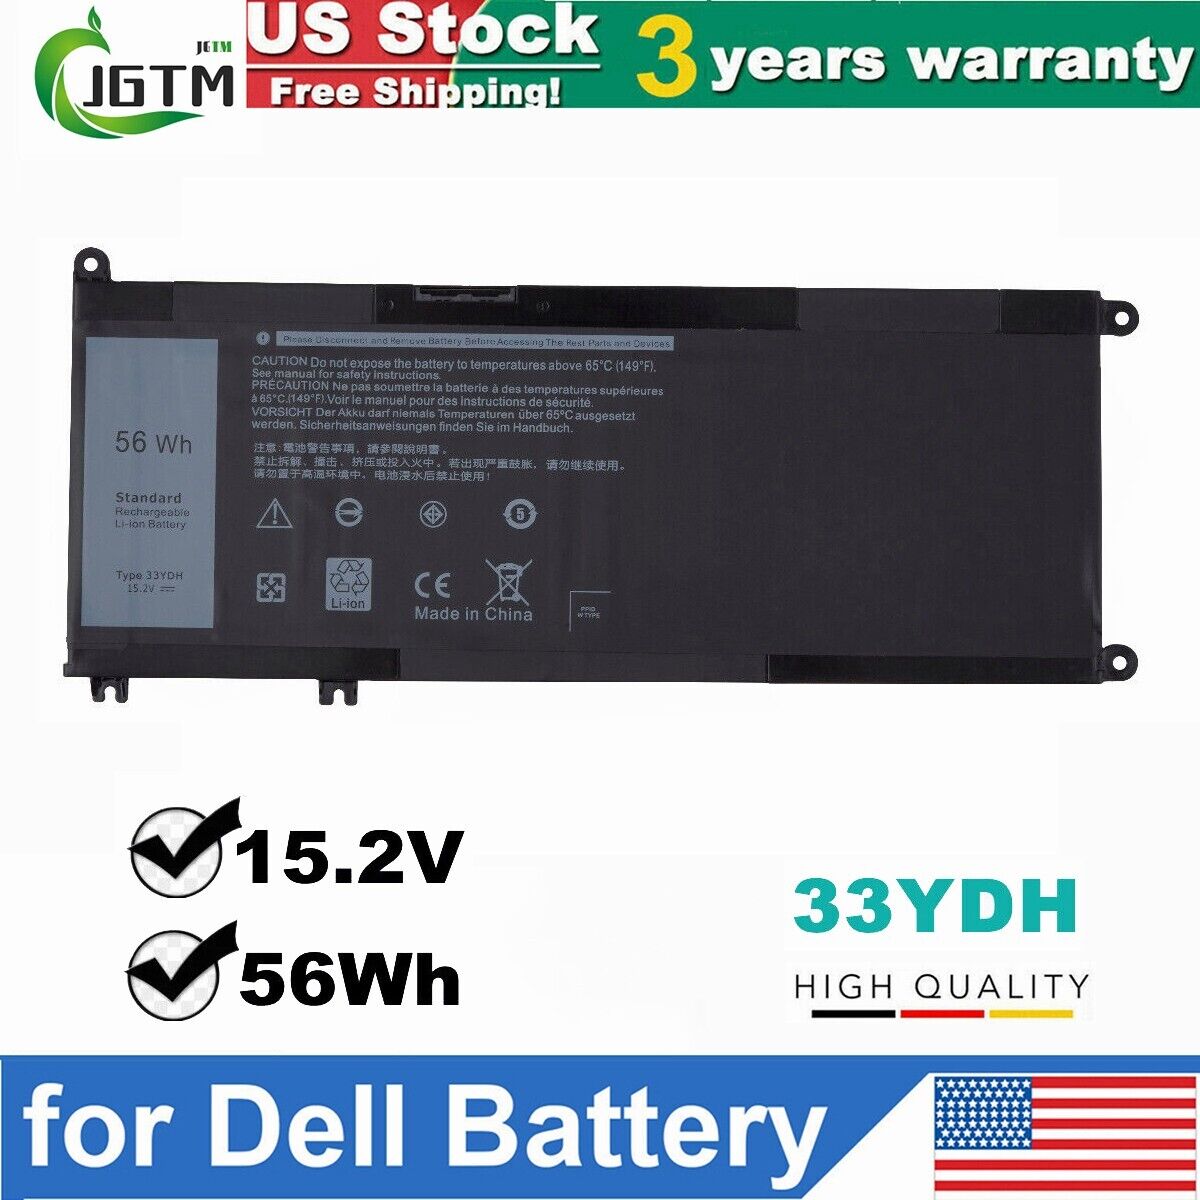 33YDH Battery For Dell Latitude 3380 3480 3490 3590 3580 Inspiron 15 17 7000 US